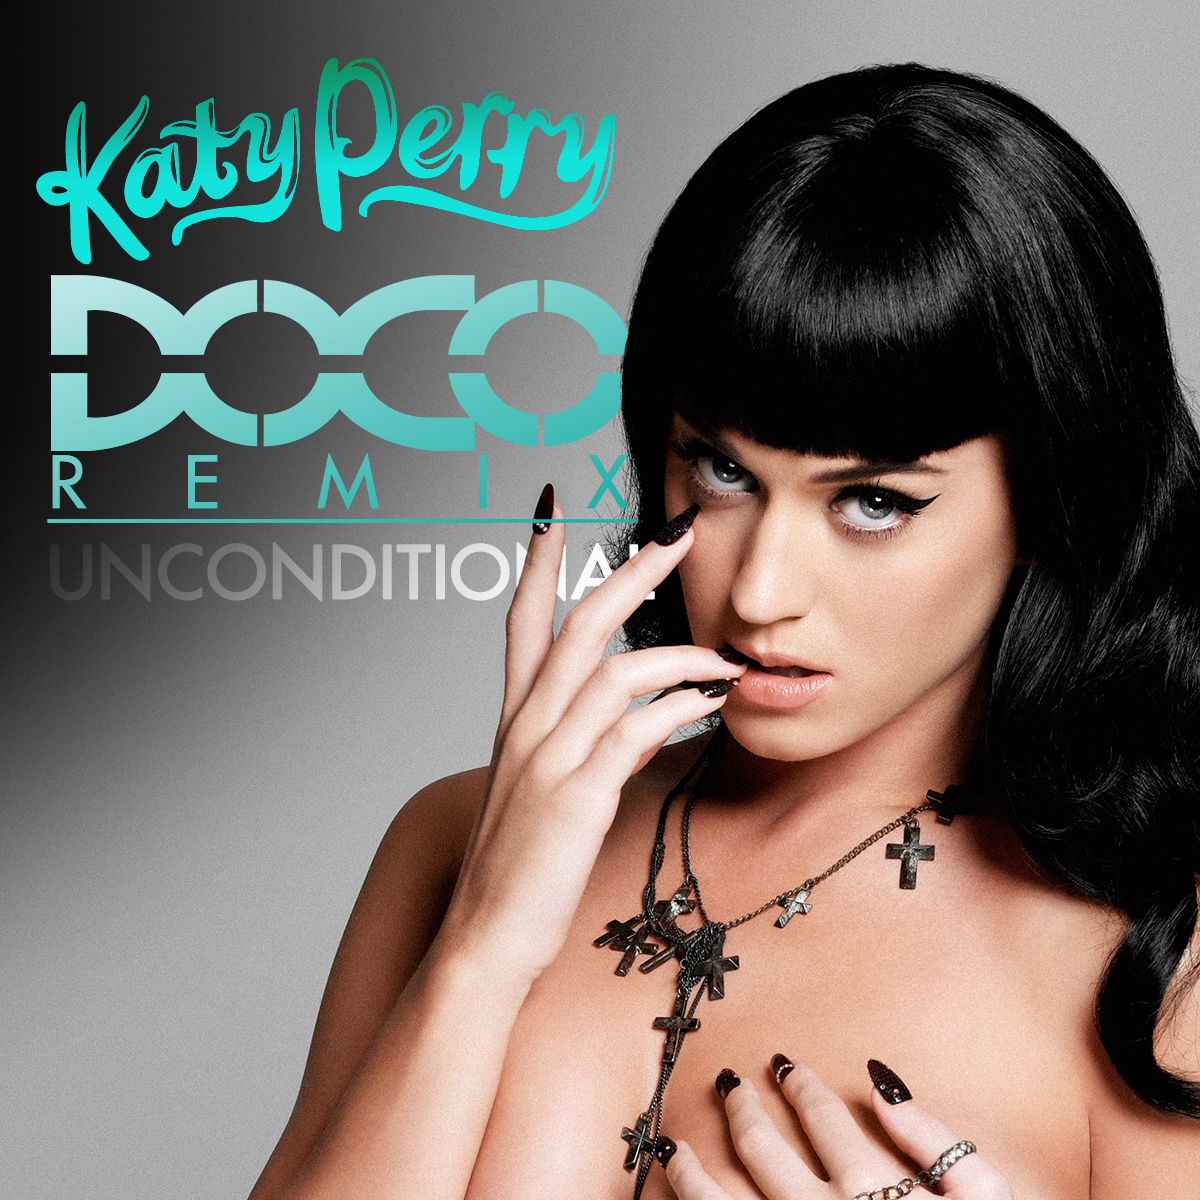 unconditionally katy perry free mp3 download